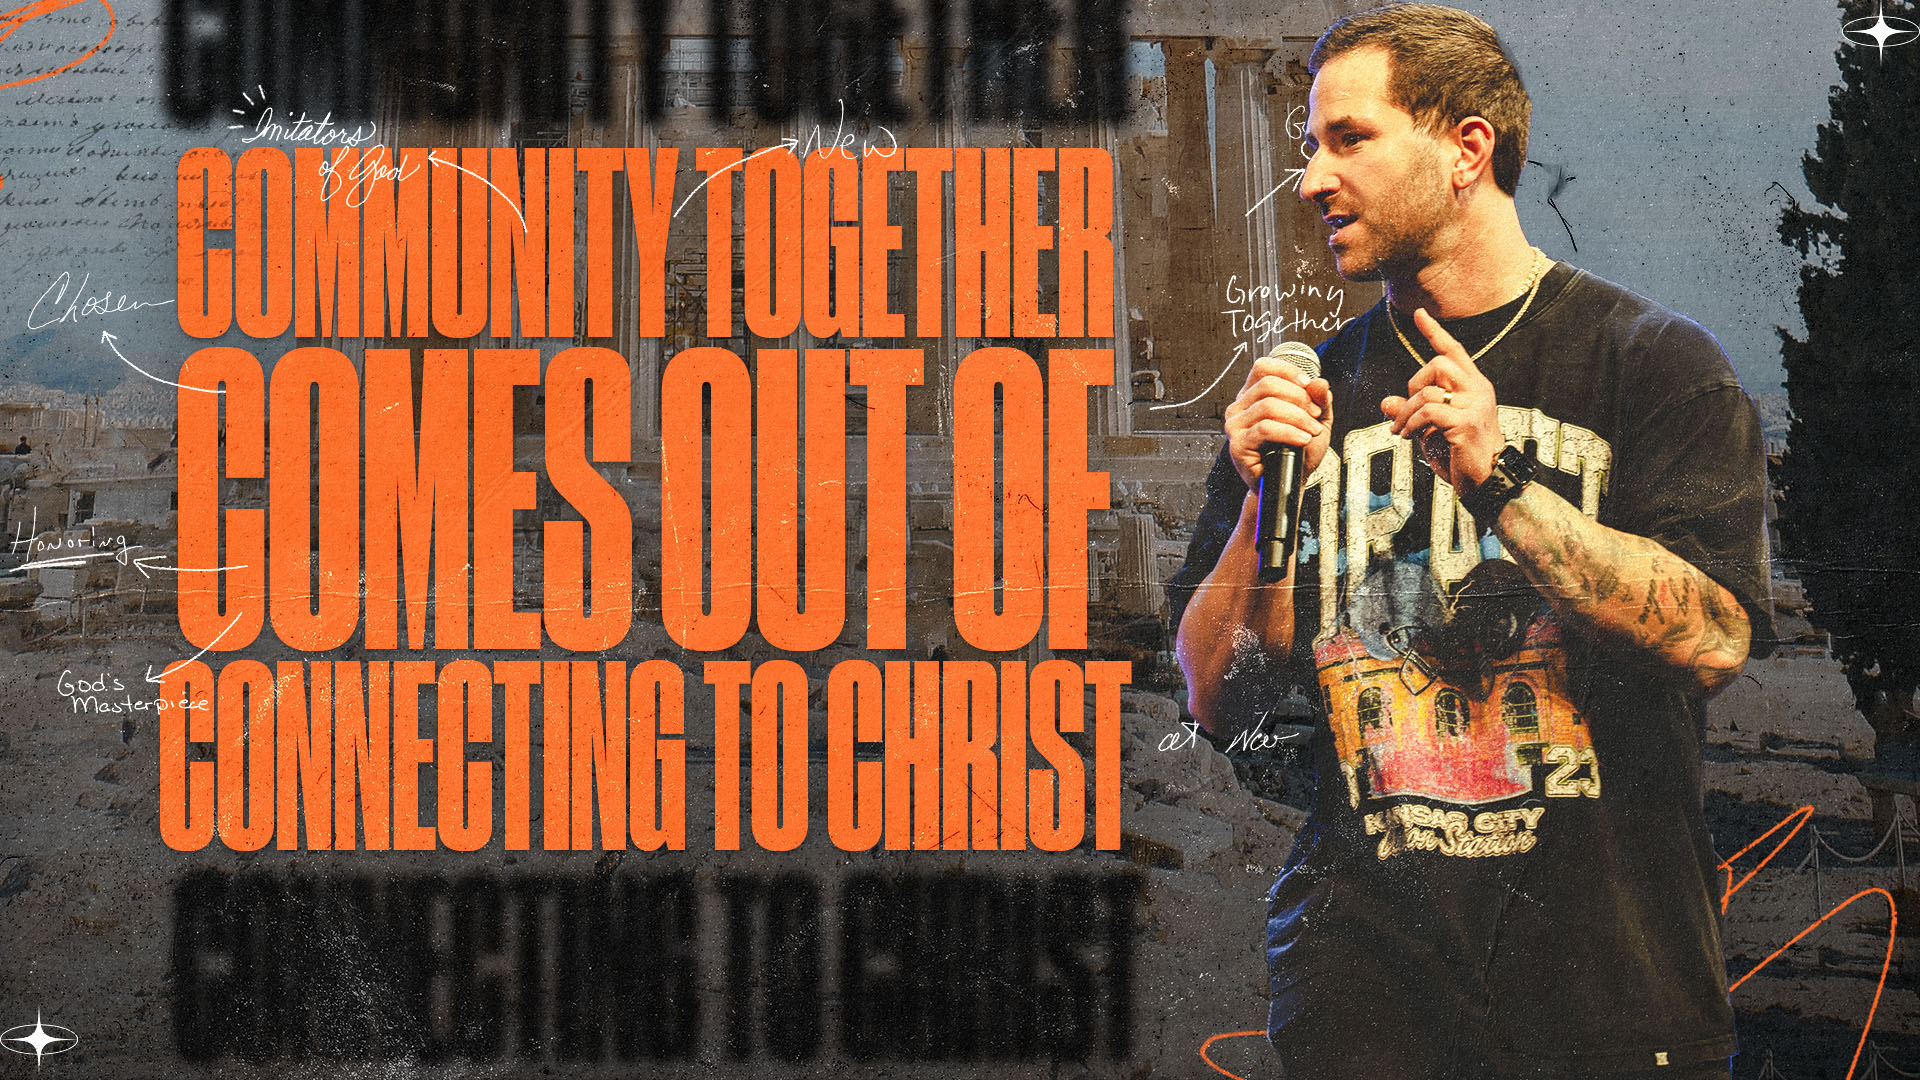 Community together comes out of connecting to Christ